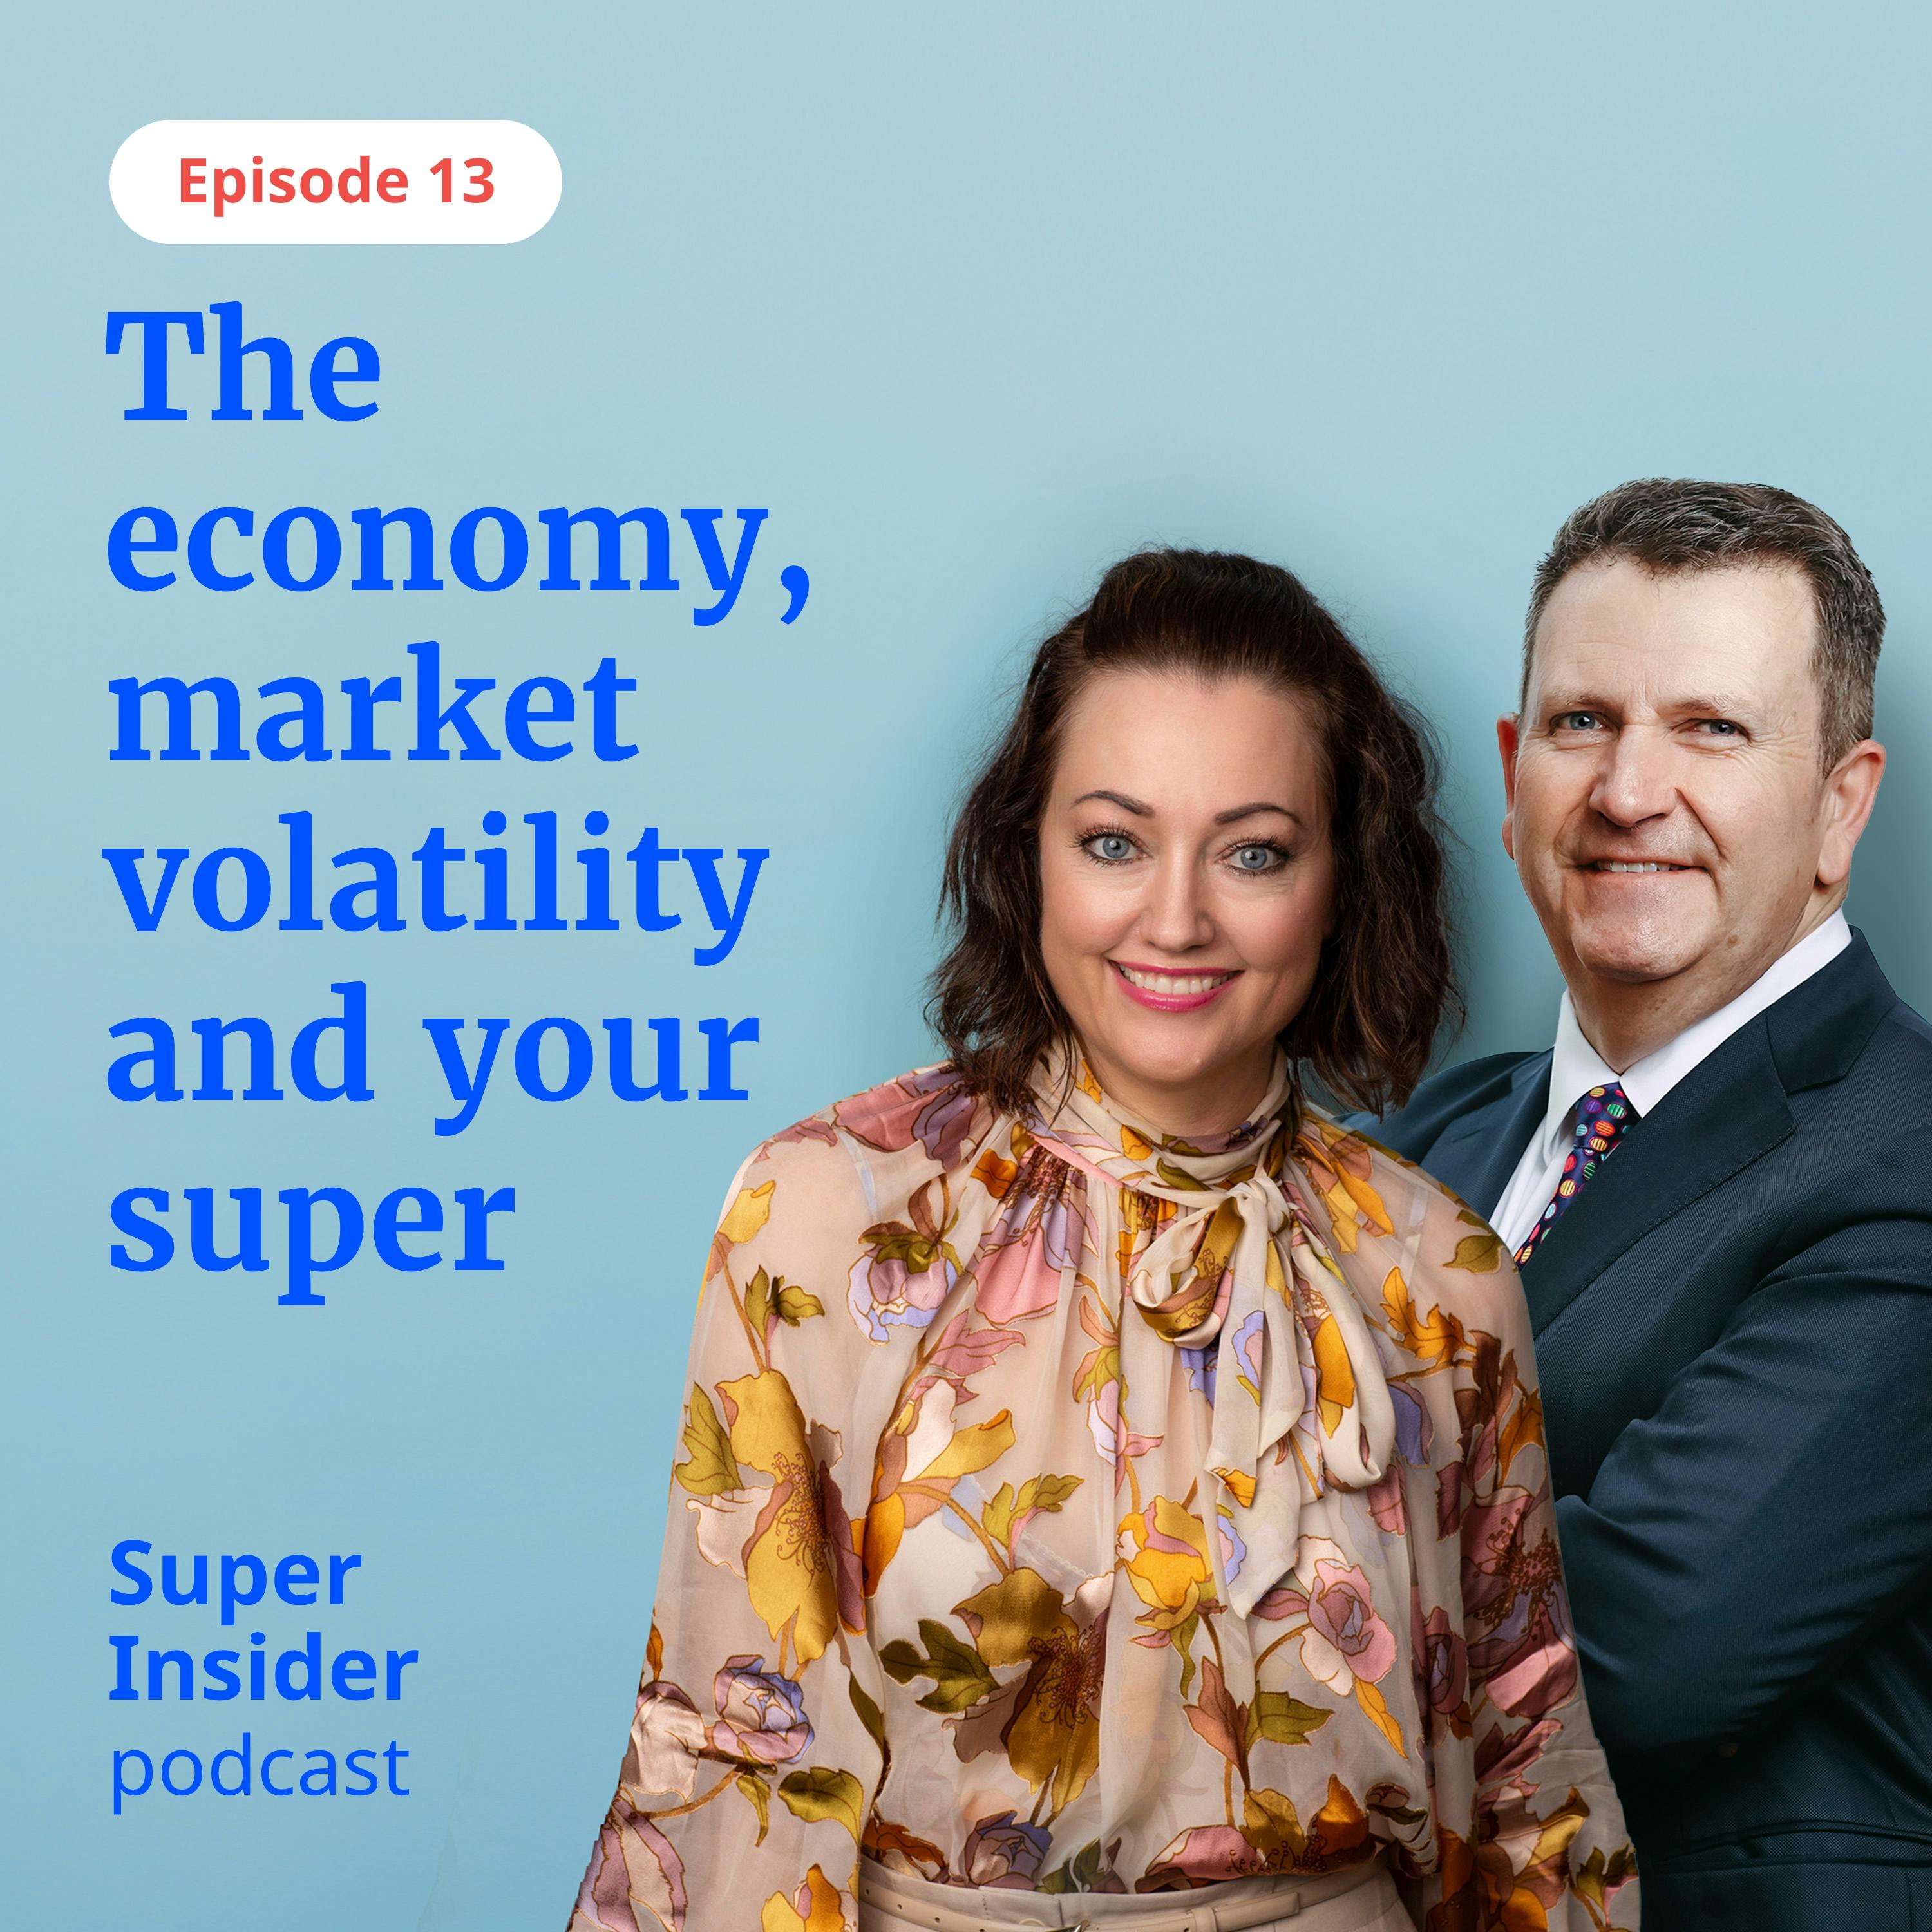 The economy, market volatility and your super